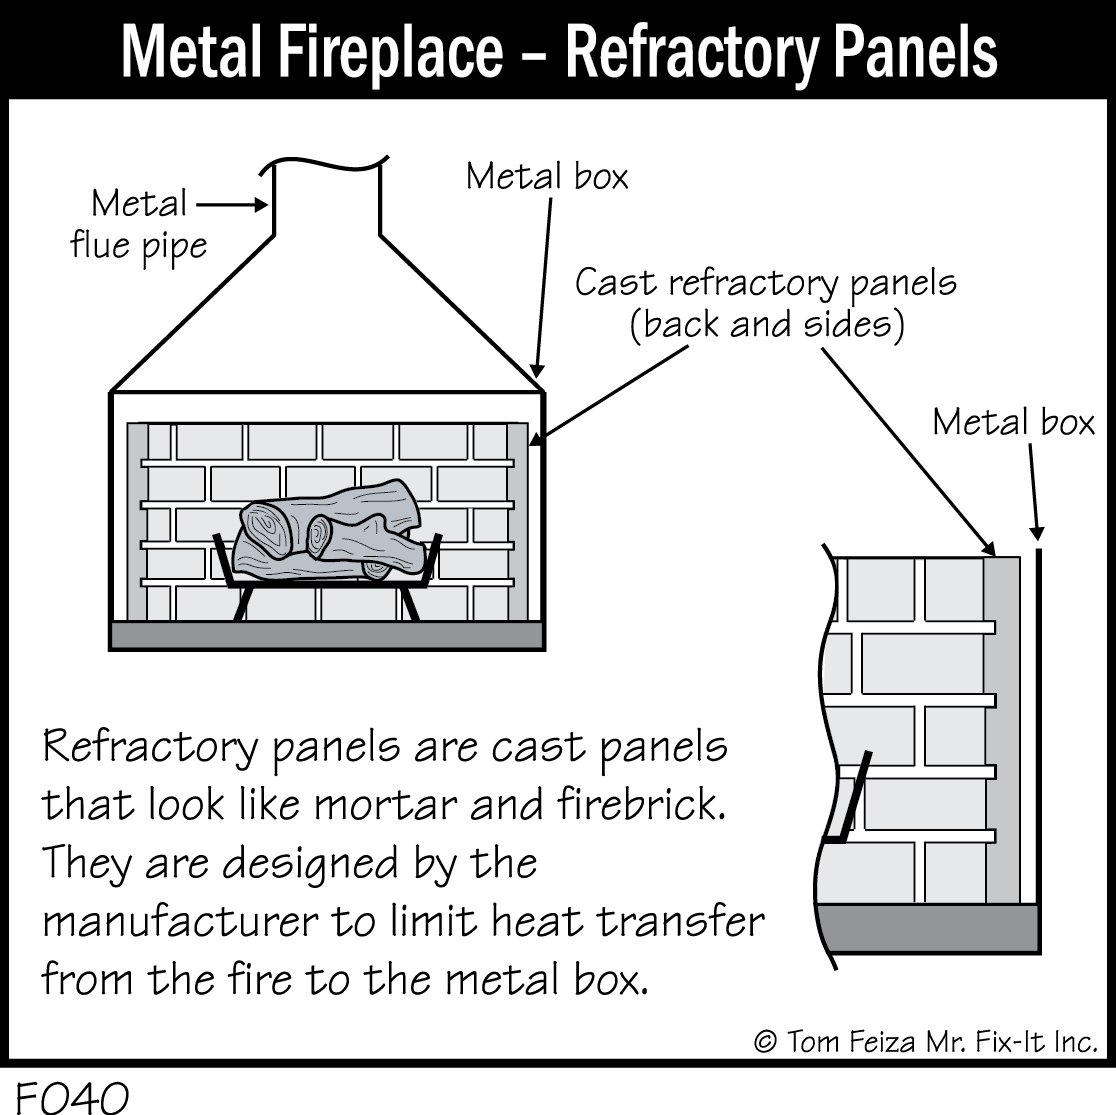 F040 - Metal Fireplace - Refractory Panels - Covered Bridge Professional  Home Inspections